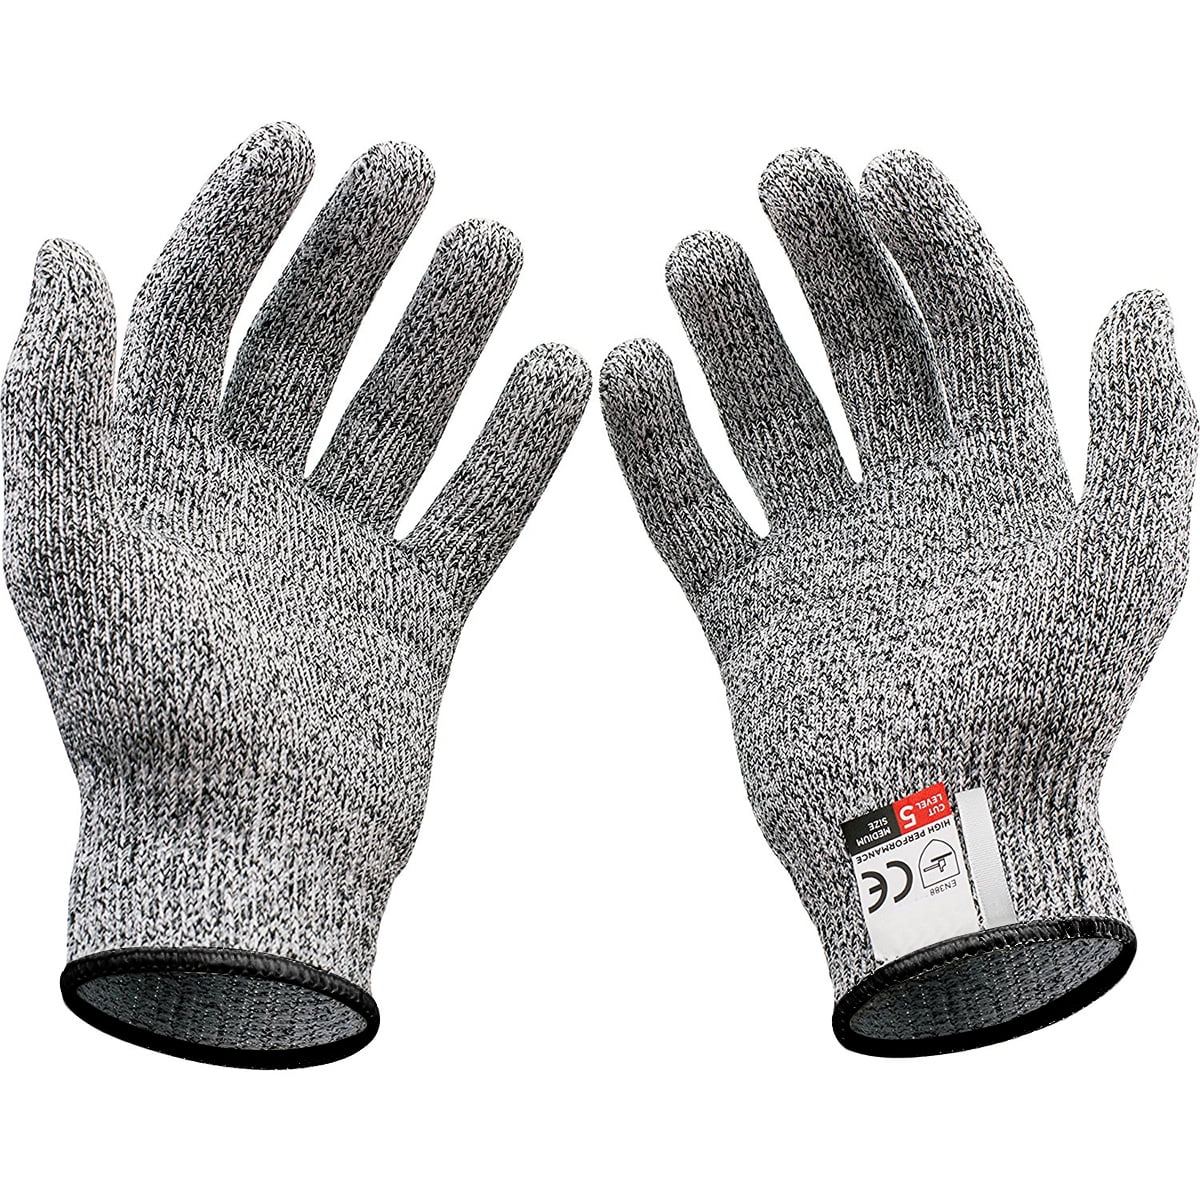 Life Protector Gray Small Cut-Resistant Glove - Level 5, Food Safe - 7 inch x 5 inch - 1 Count Box, Men's RWT0445